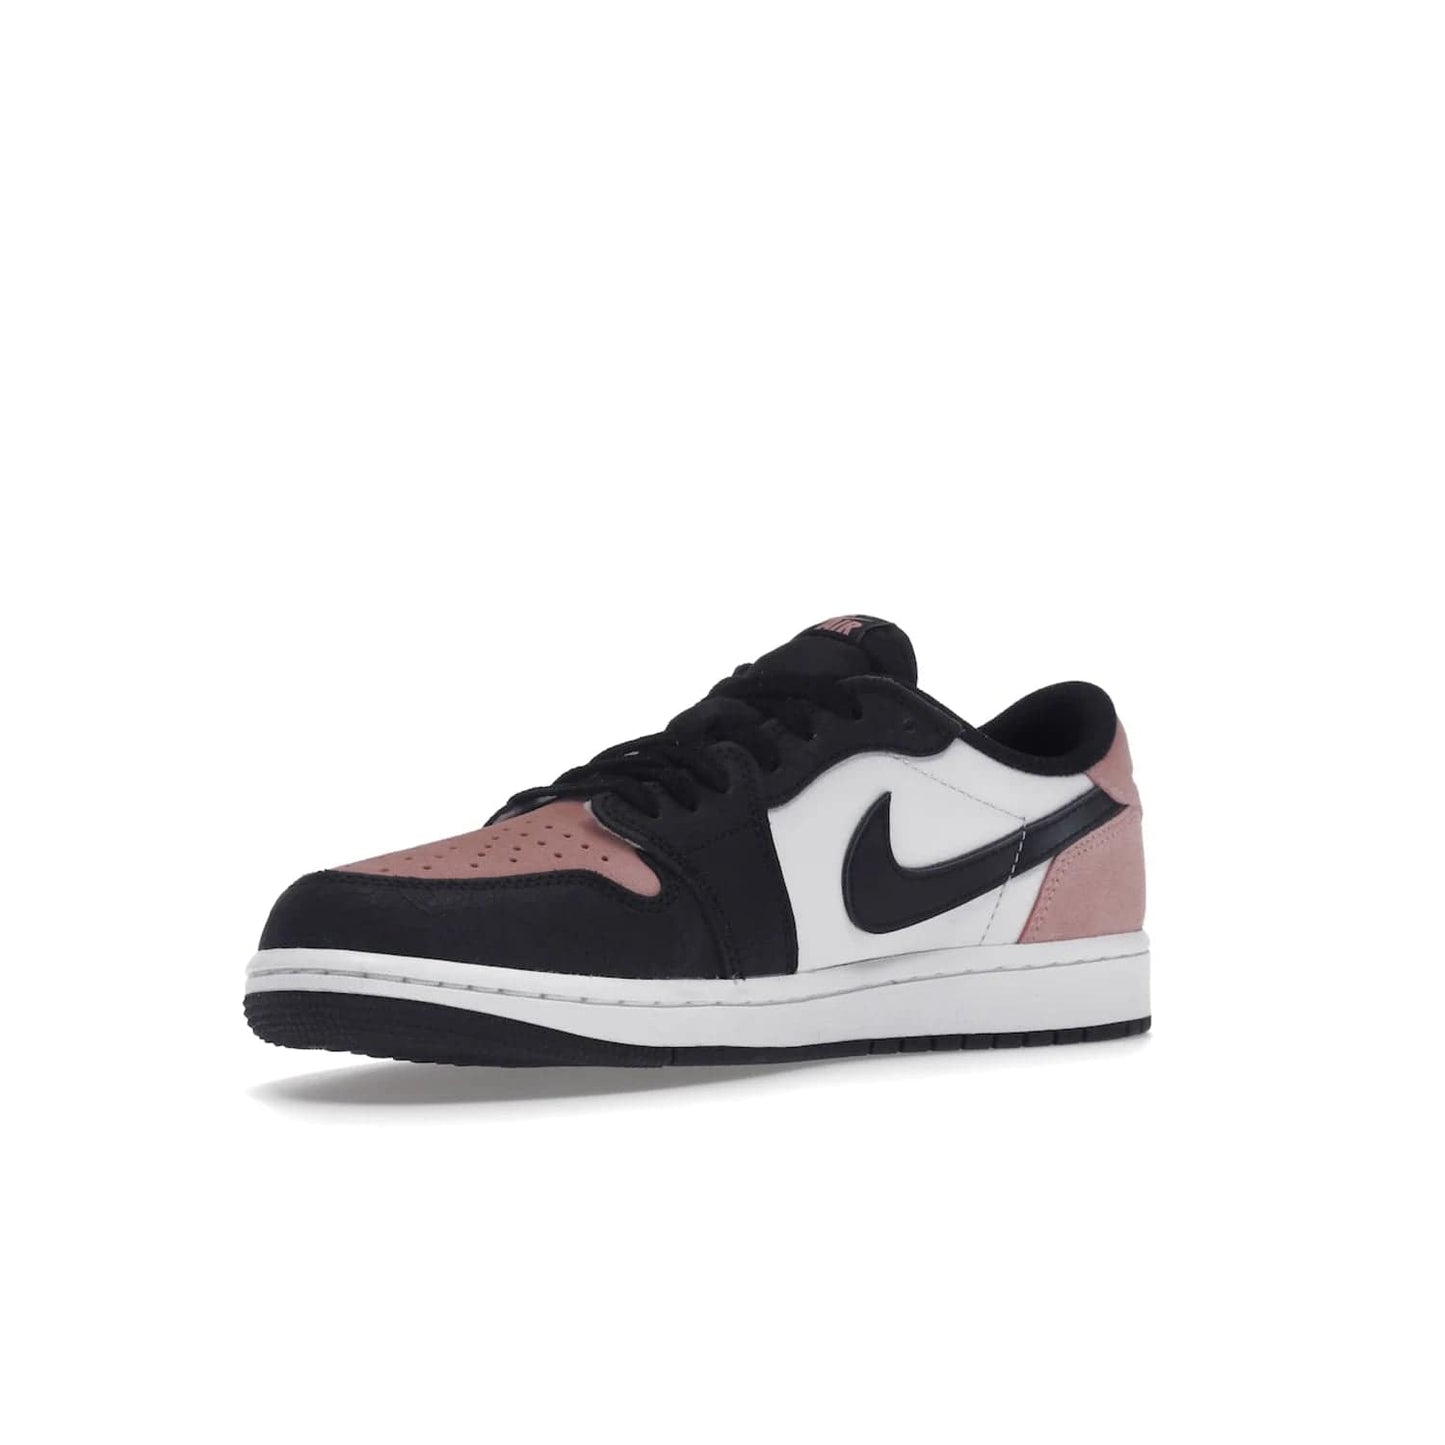 Jordan 1 Low OG Bleached Coral - Image 15 - Only at www.BallersClubKickz.com - Introducing the Air Jordan 1 Low OG Bleached Coral. Constructed with white leather, black cracked leather & Bleached Coral suede. Signature Jordan Wings logo, white Air sole. Get the pack in July 2022 and stand out.